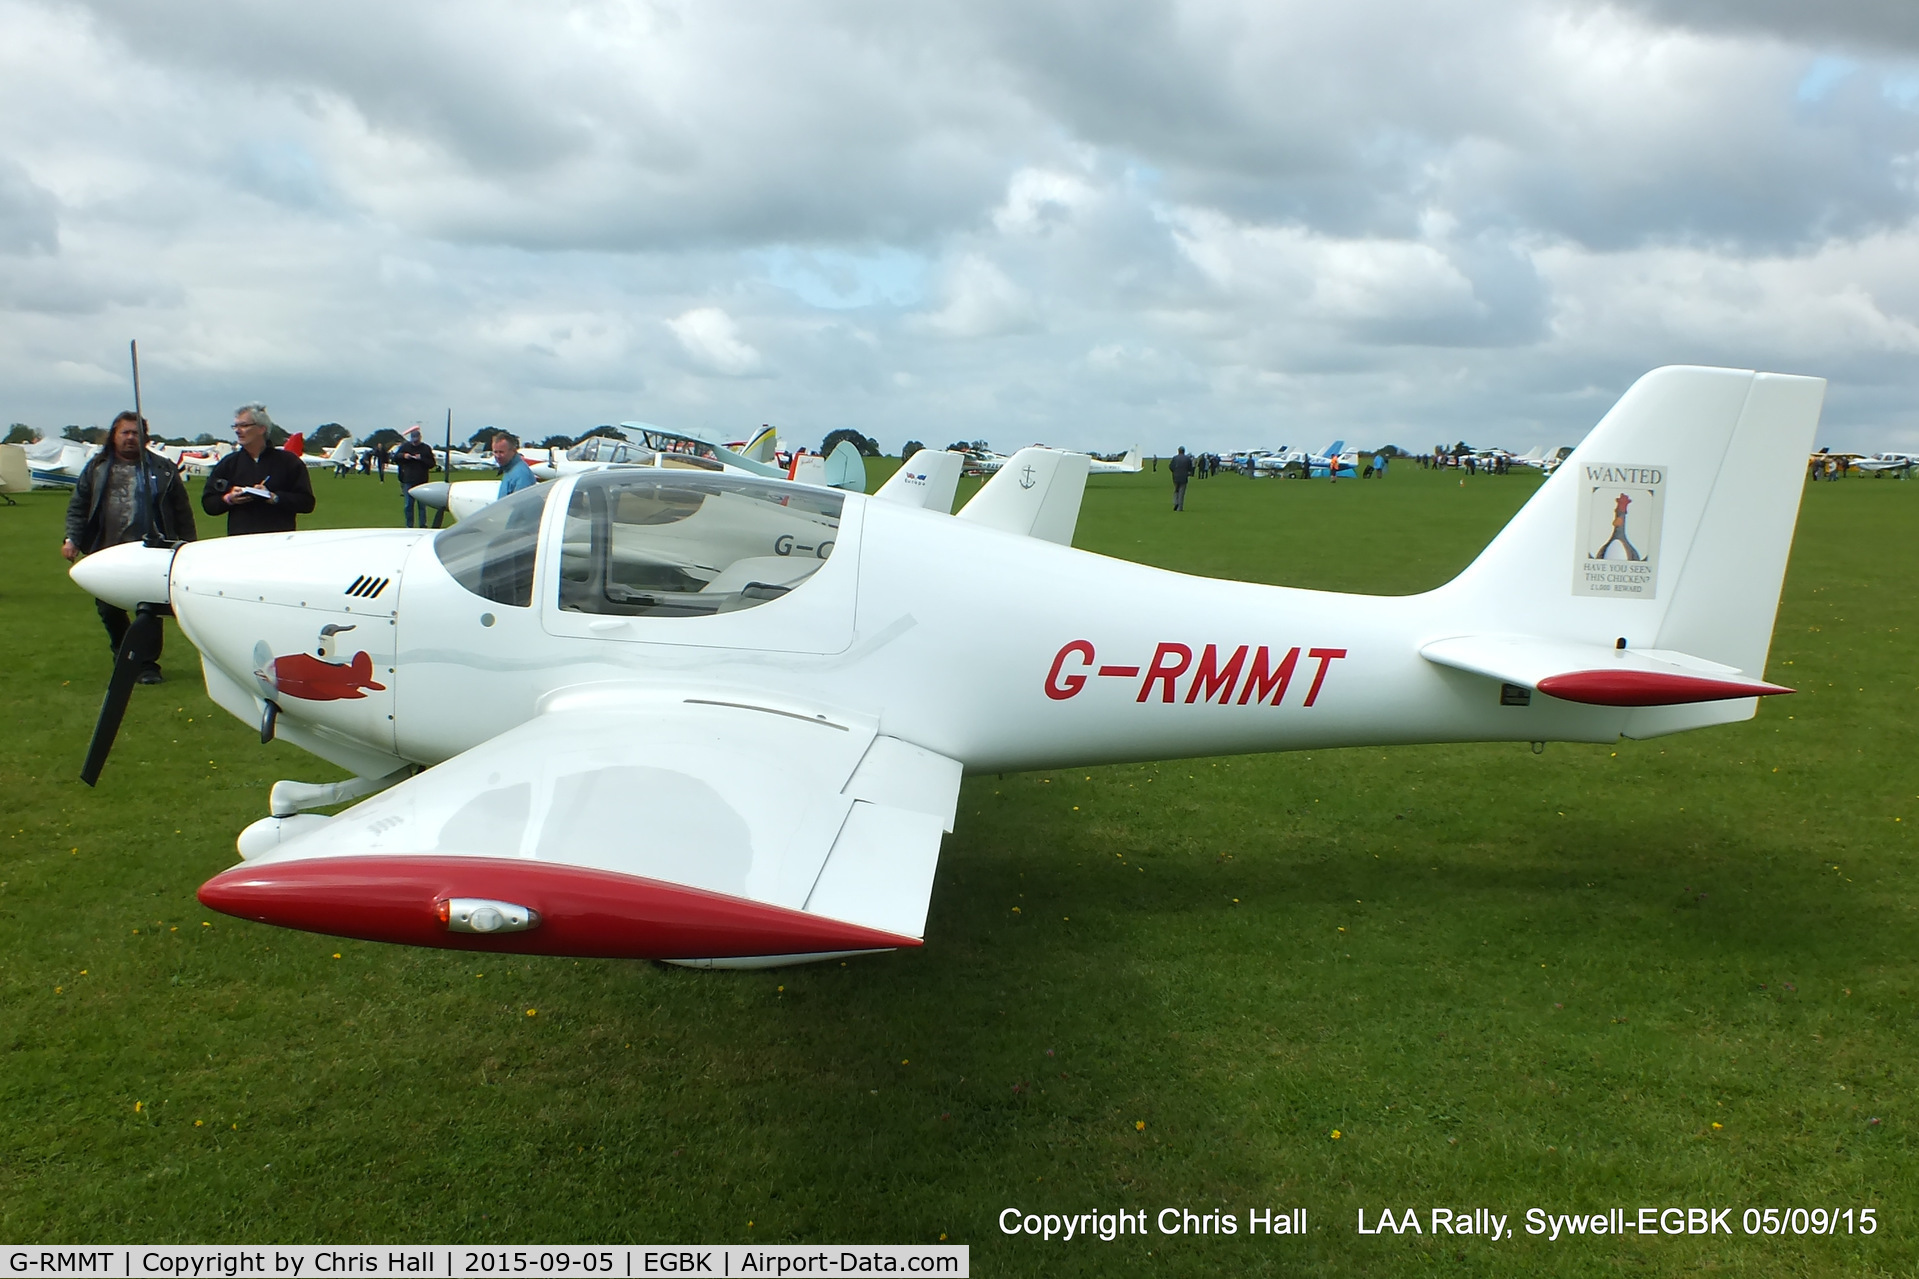 G-RMMT, 2004 Europa XS Tri-Gear C/N A260, at the LAA Rally 2015, Sywell